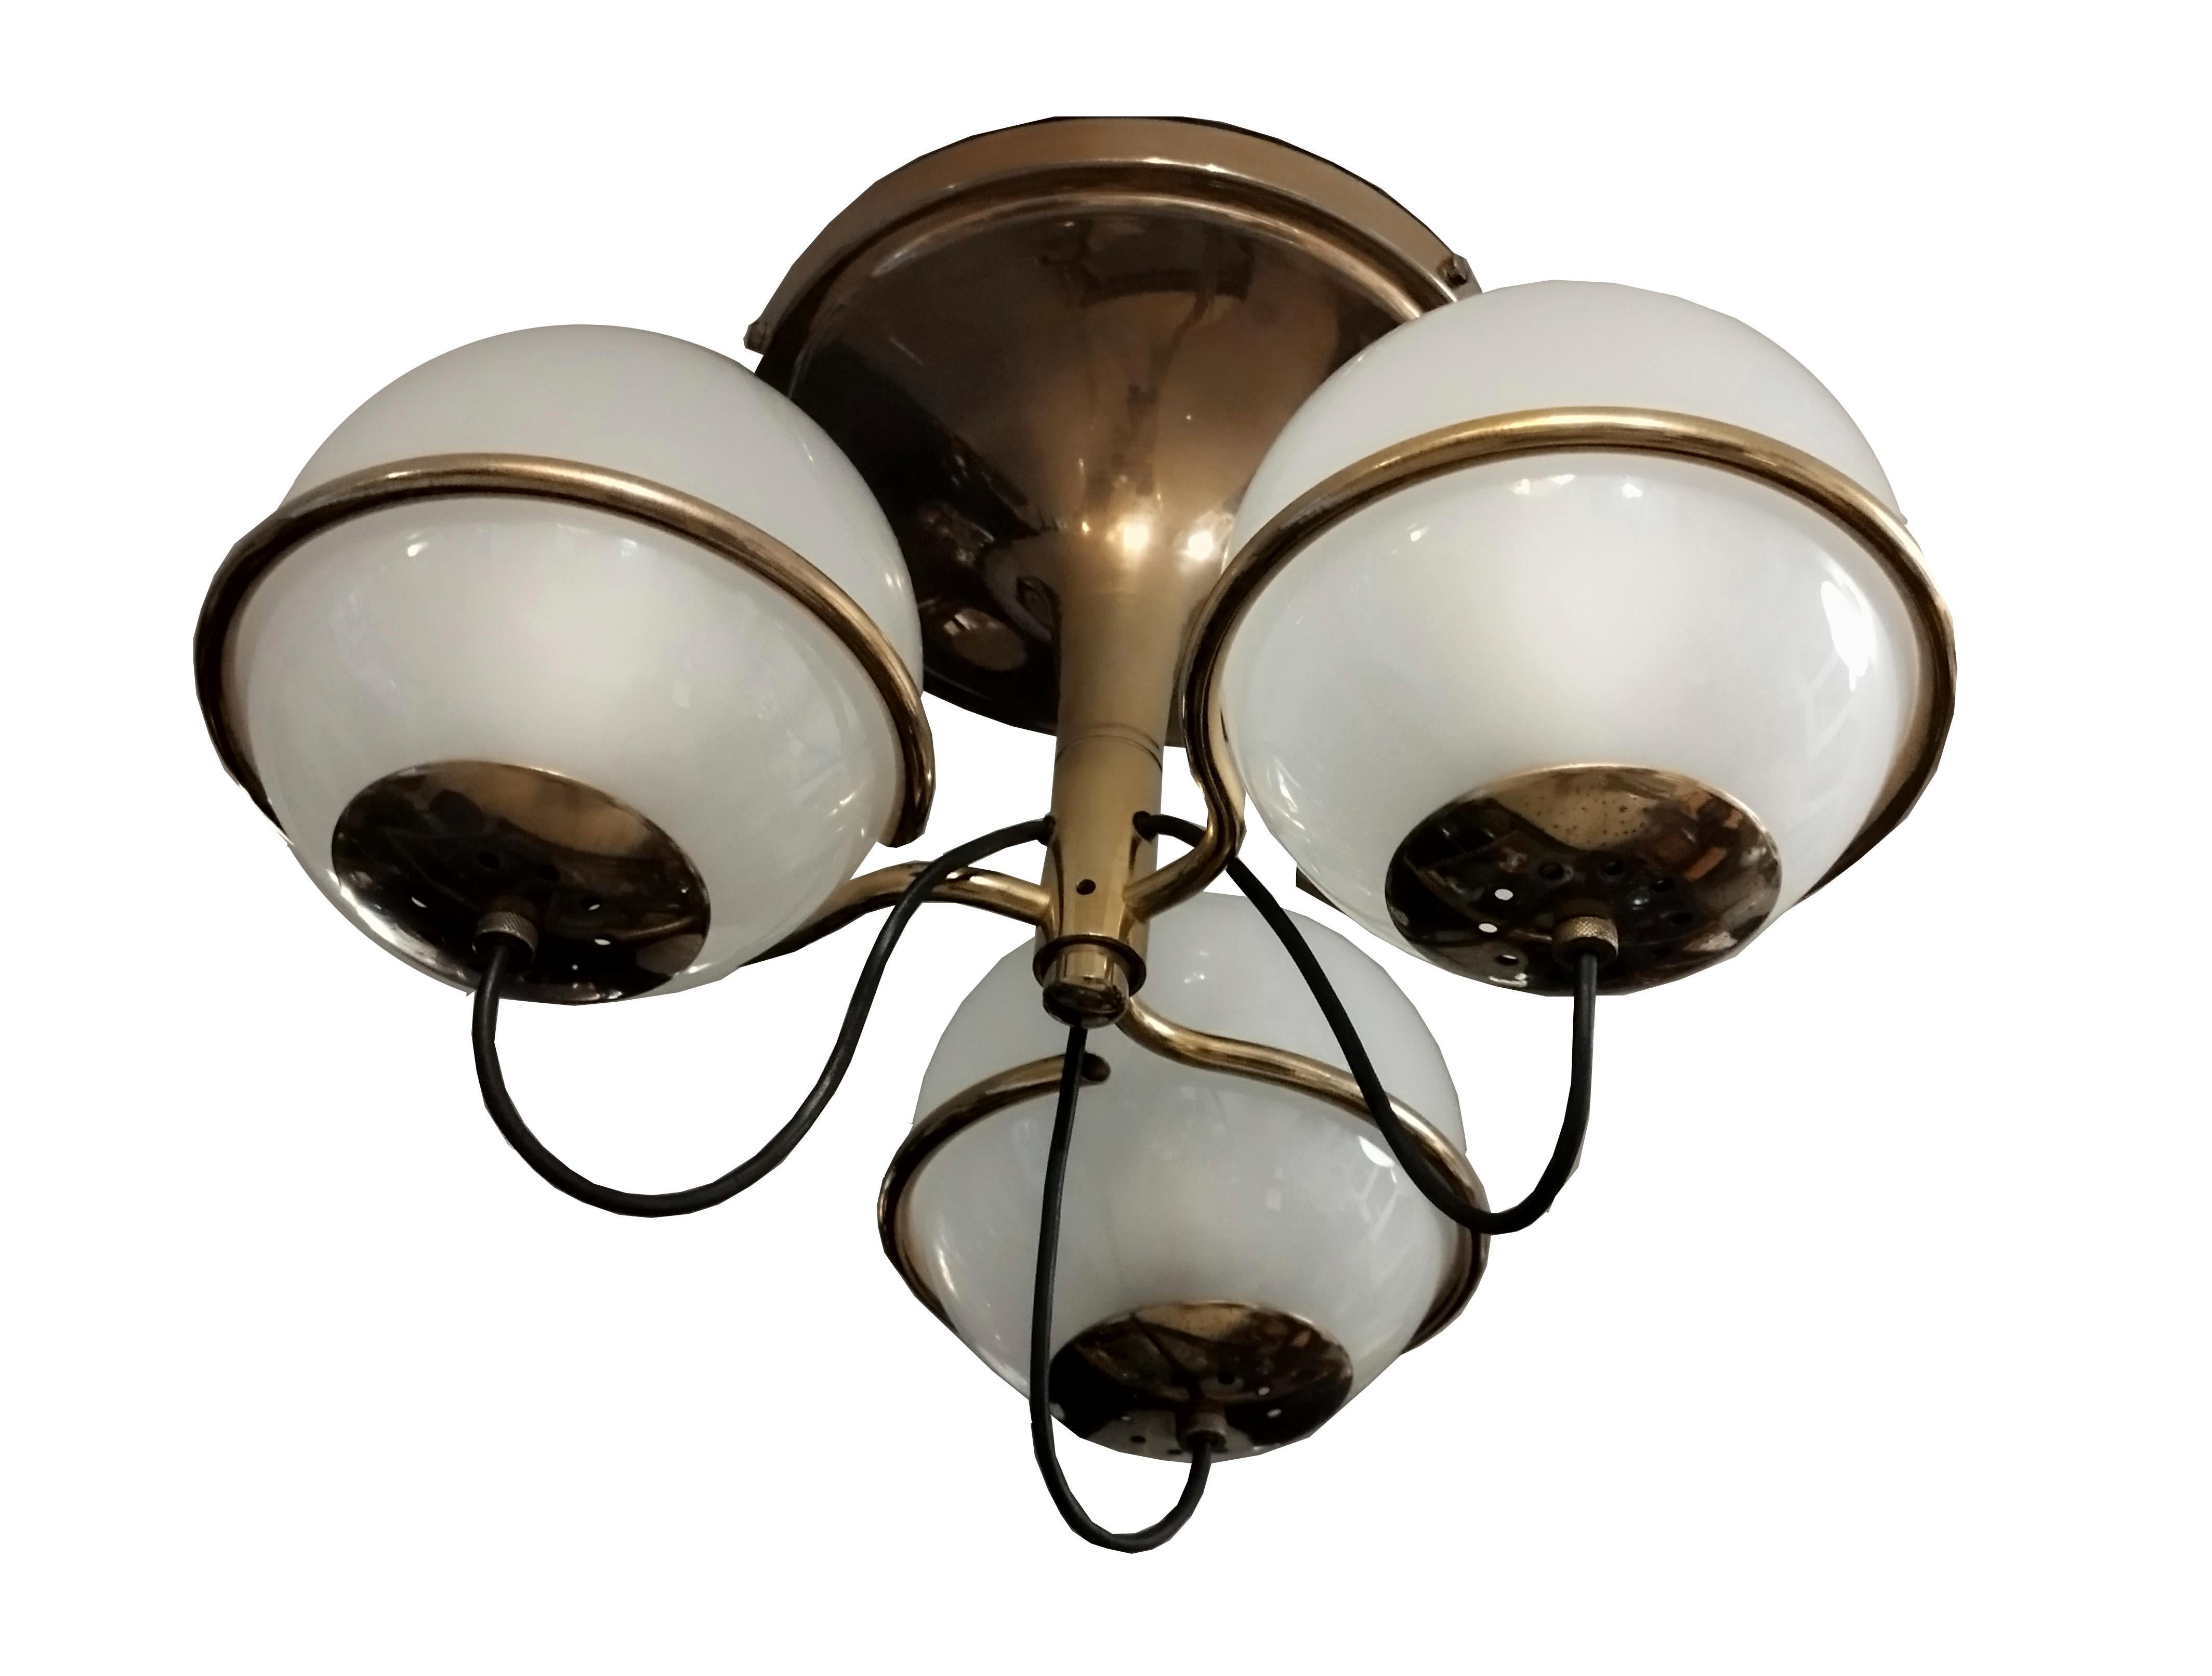 Rare ceiling lamp model 2042/3 designed by Gino Sarfatti and produced by Arteluce, Italy 1960. This version of the 2042 lamp has a gilded metal frame and 3 glass globes that produce an incredible warm and atmospheric light. The lamp is completely